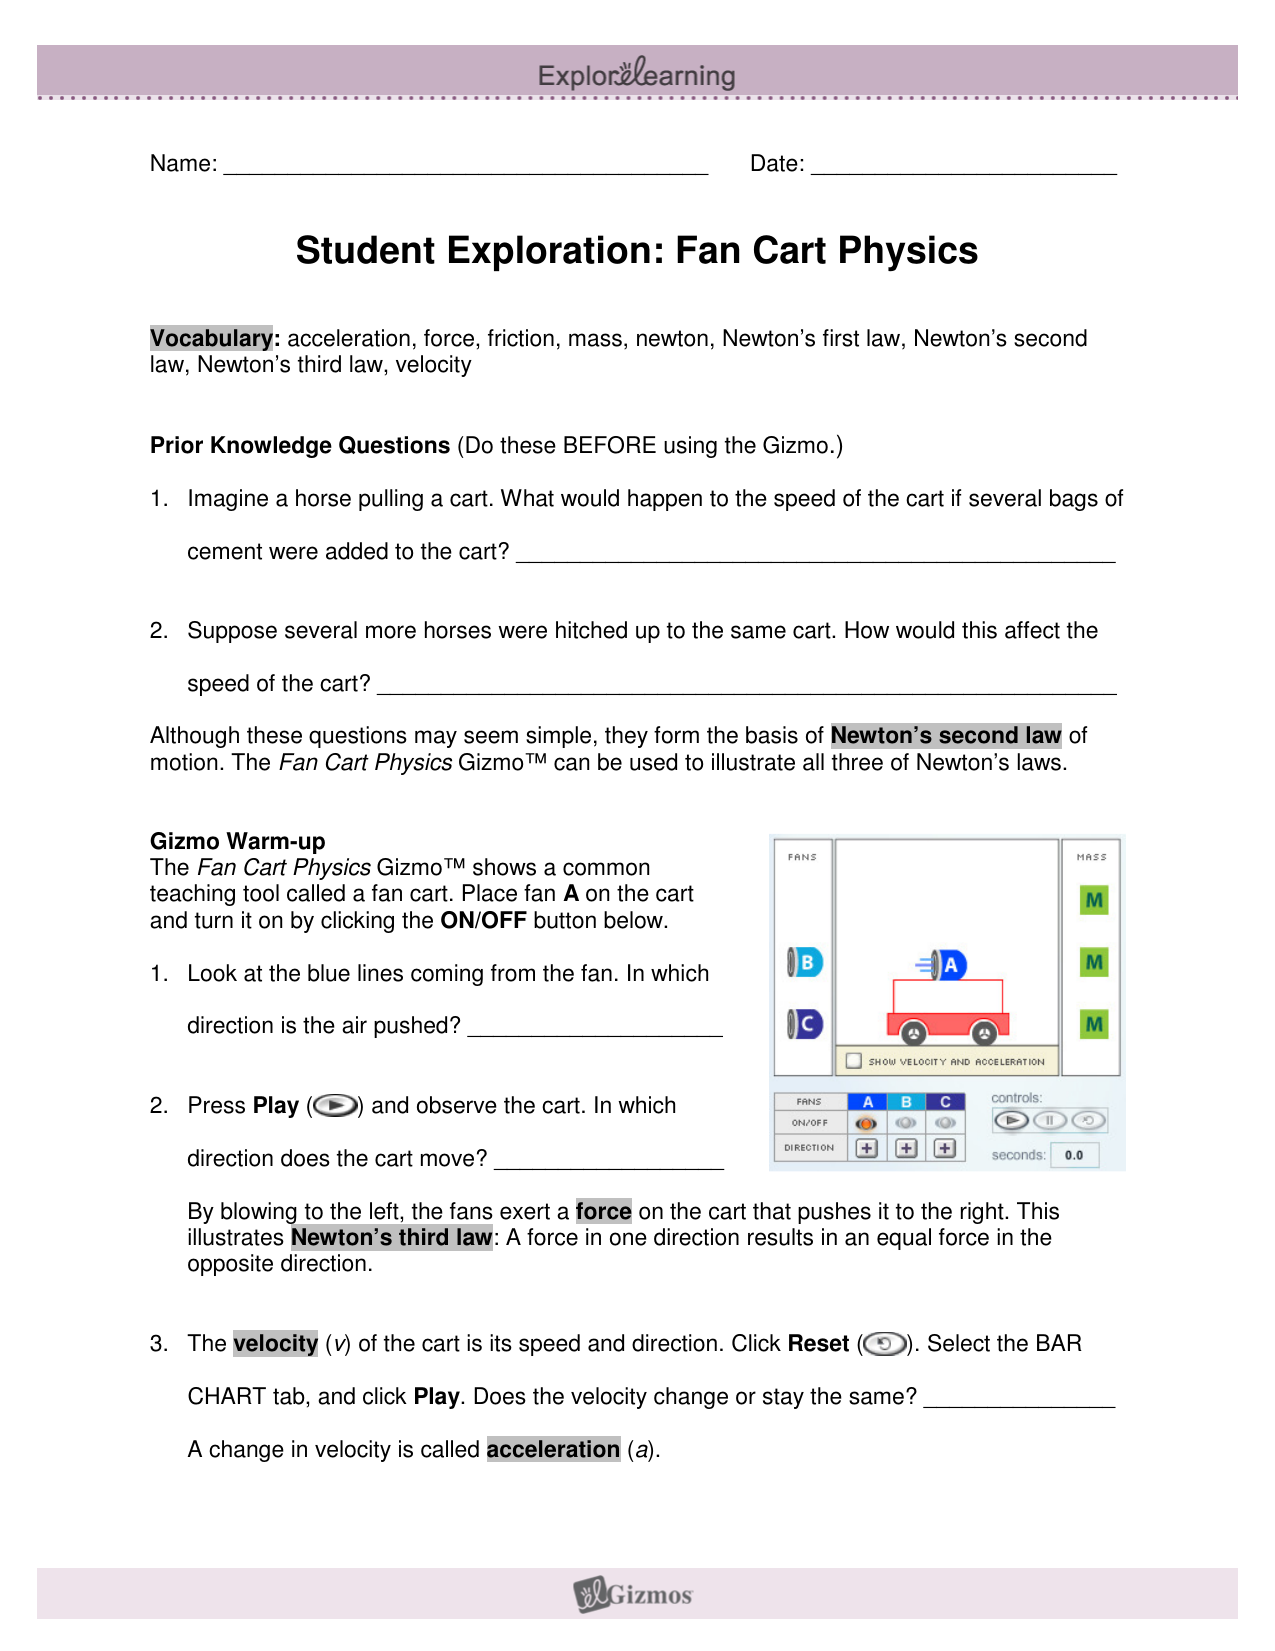 Student Exploration: Force and Fan Carts, PDF, Force